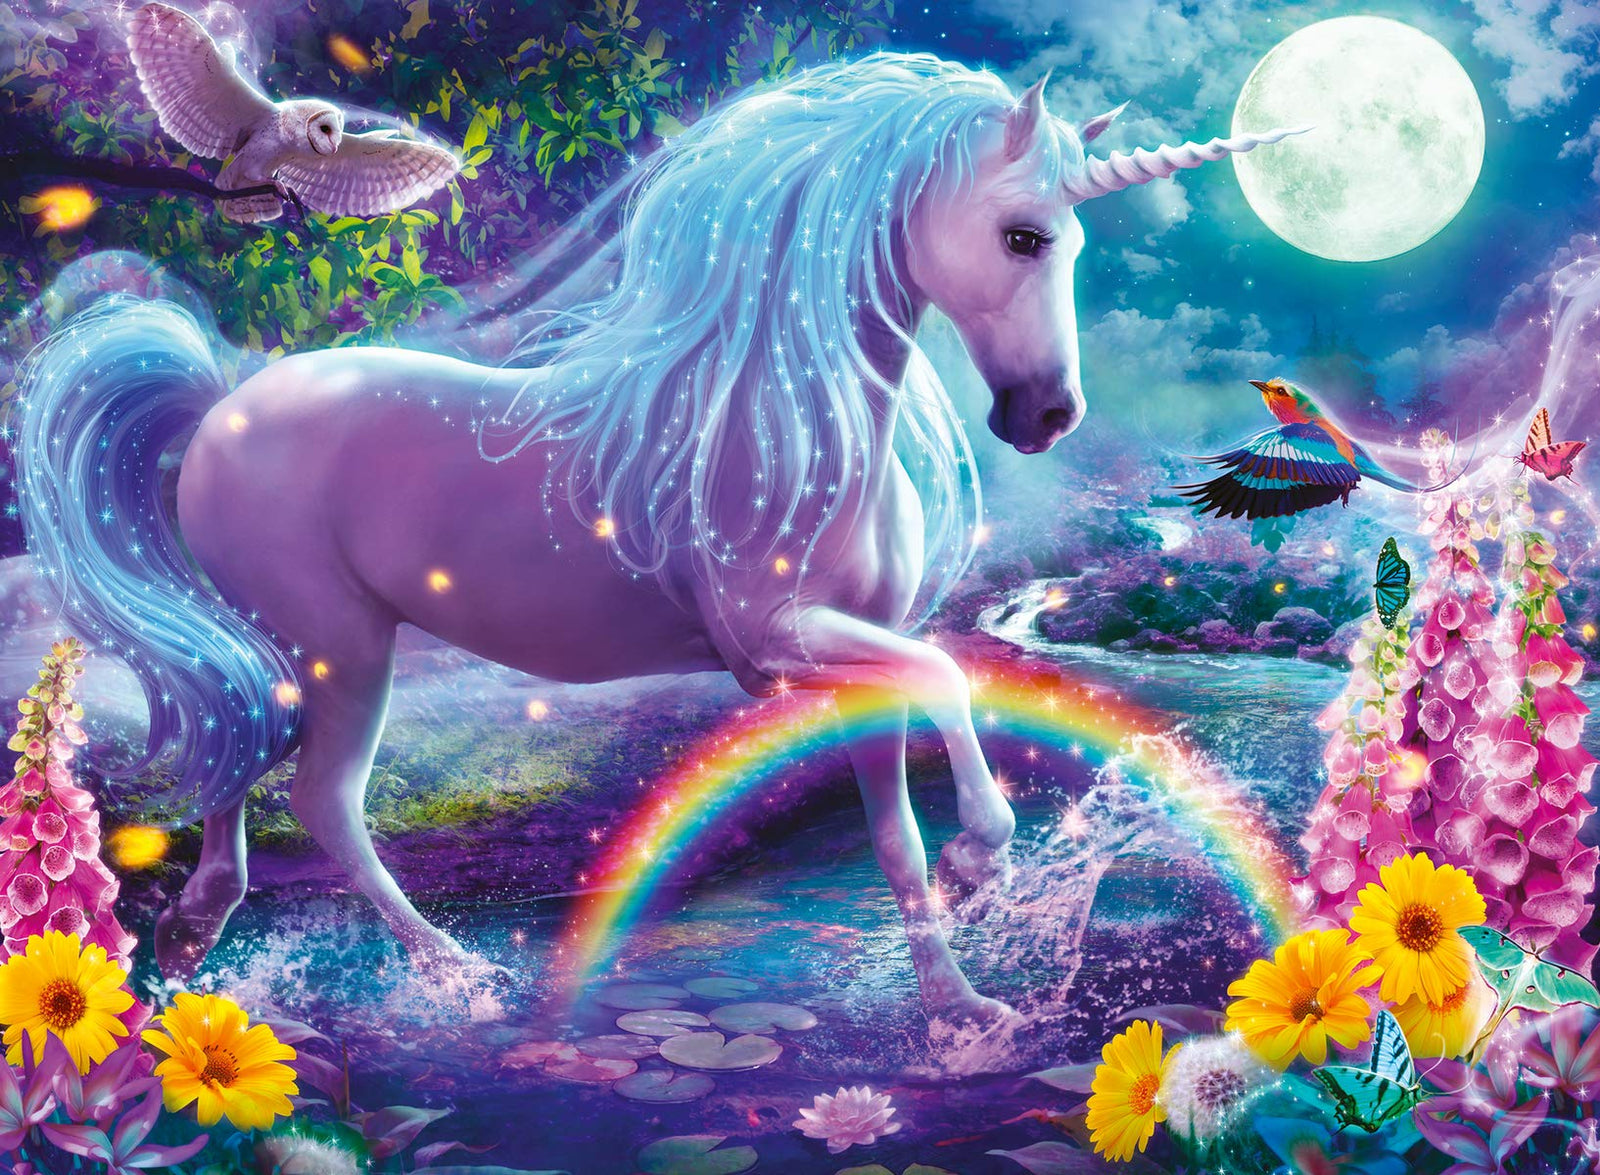 Ravensburger Glitter Unicorn 100 Piece Puzzles for Kids, Every Piece is Unique, Pieces Fit Together Perfectly